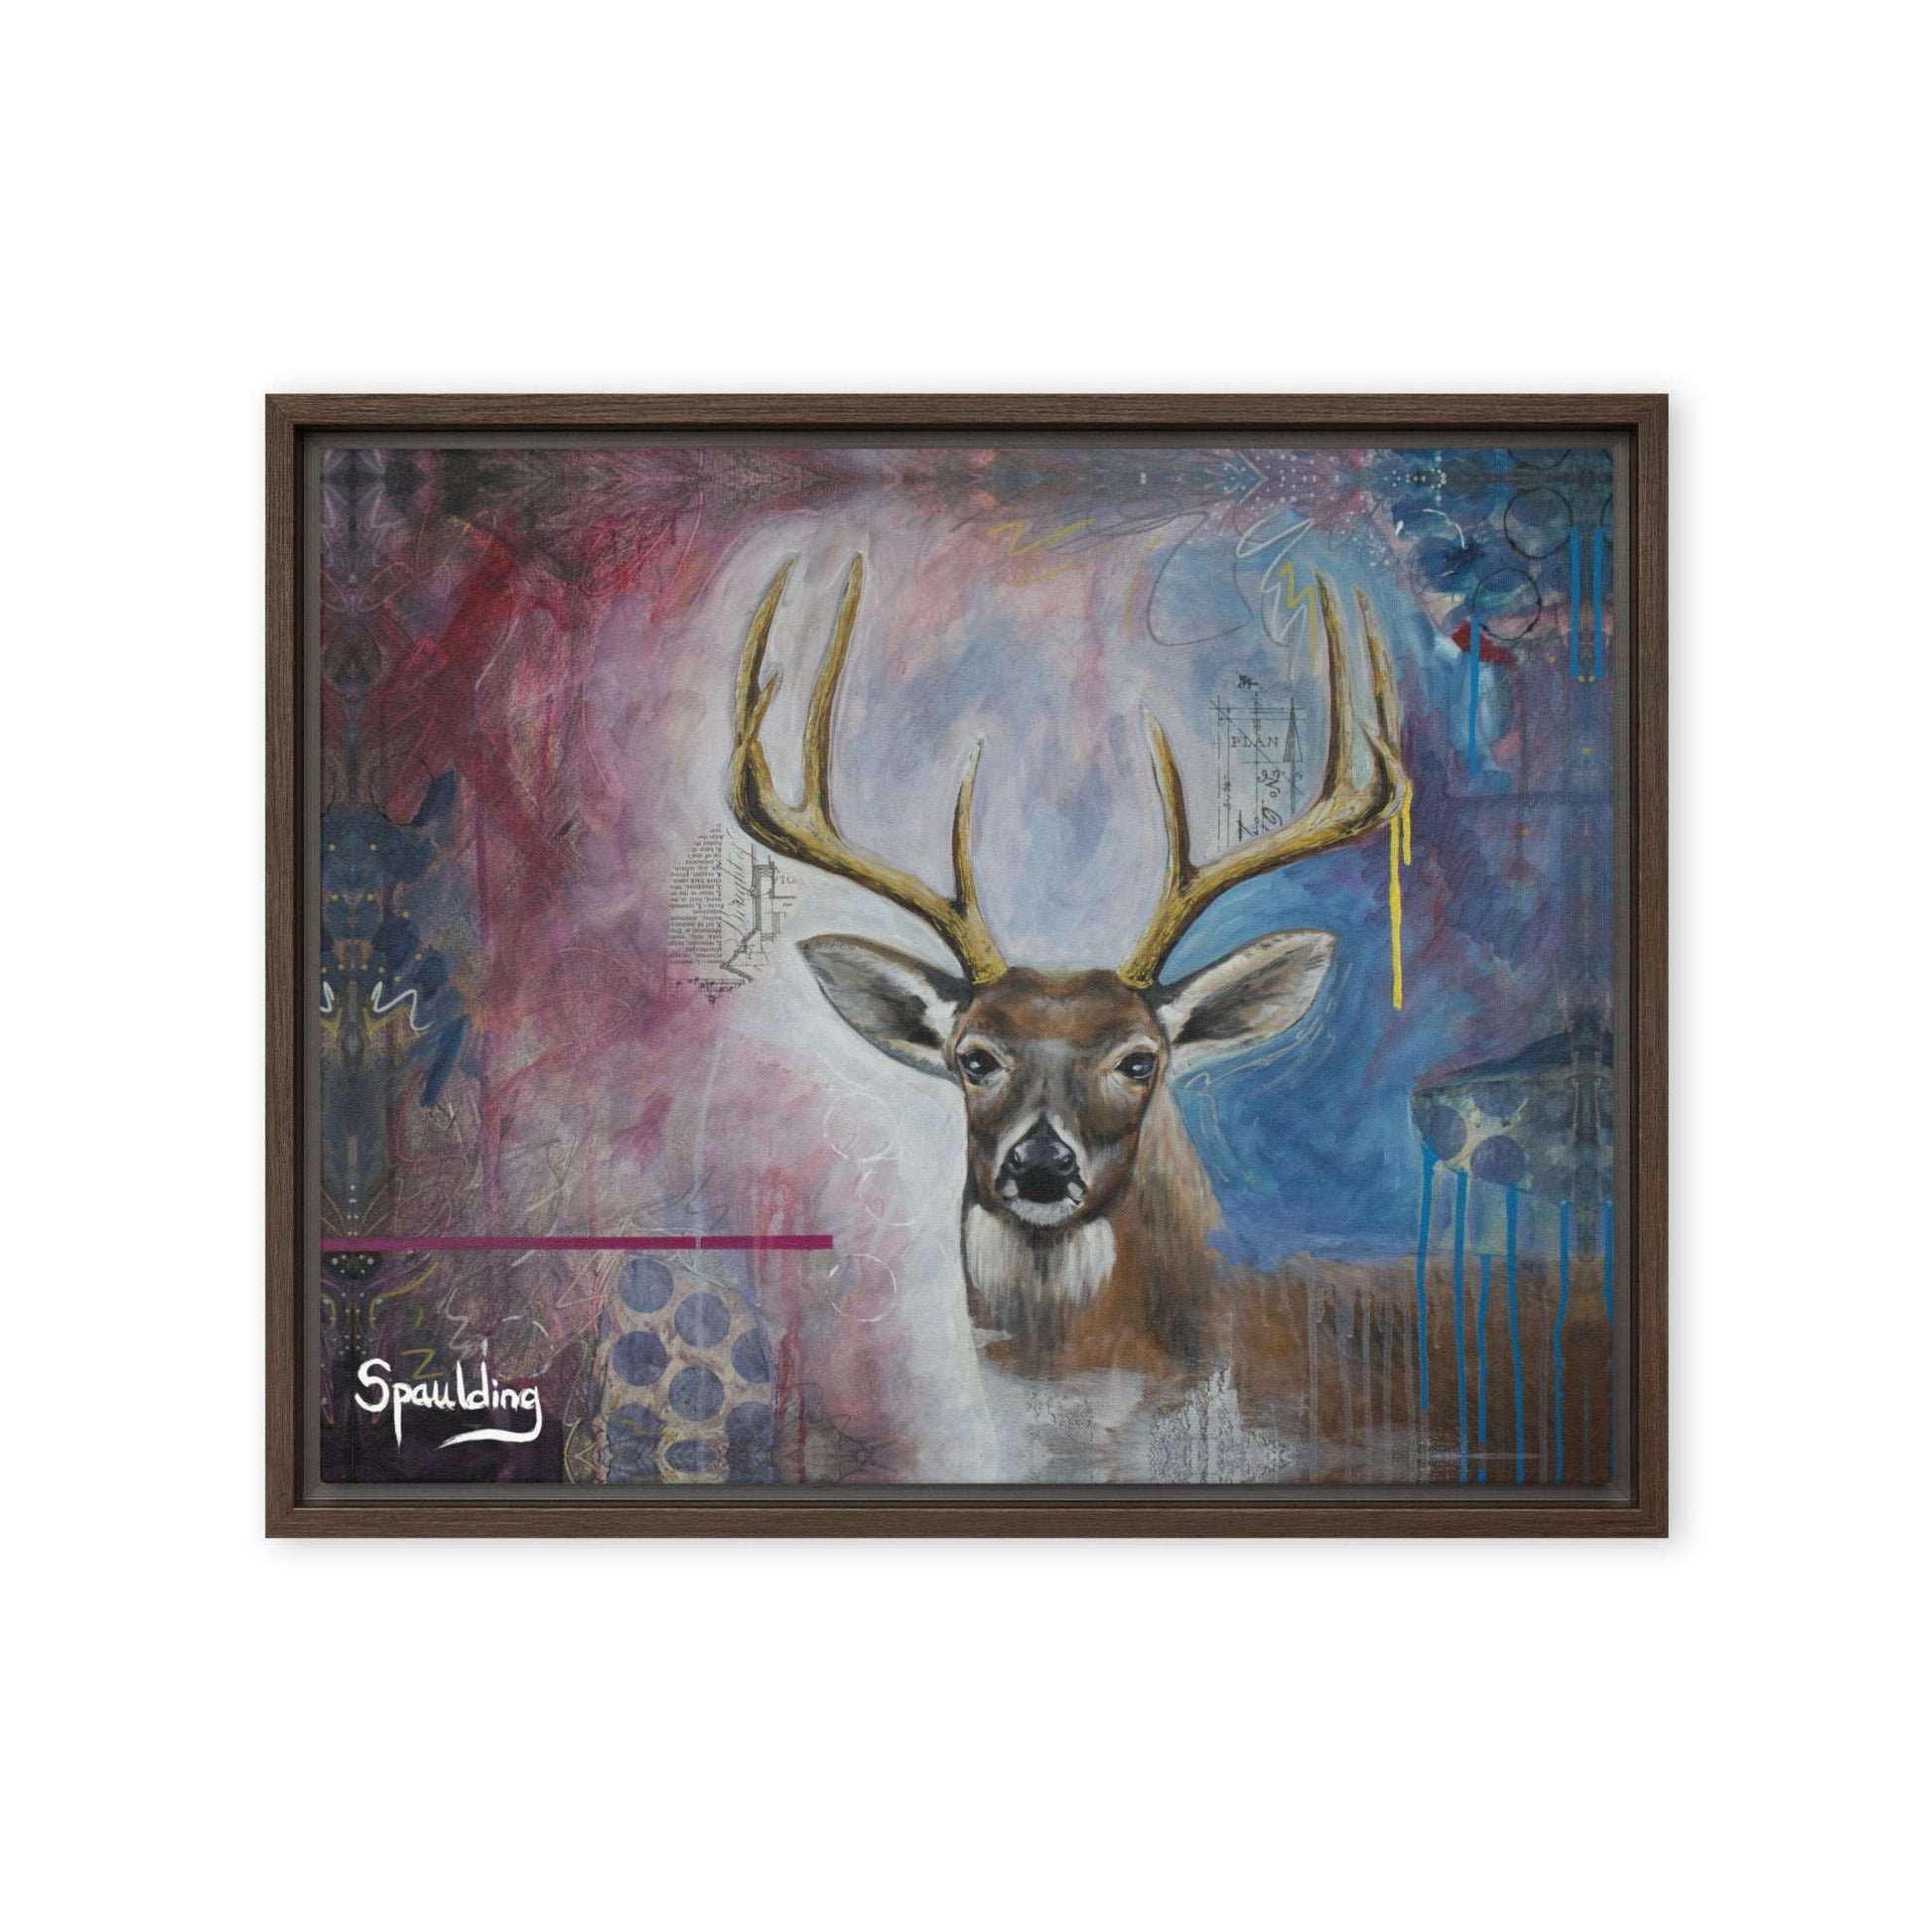 Framed canvas print with whitetail deer with antlers. Background color scheme is blues, whites, muted reds.